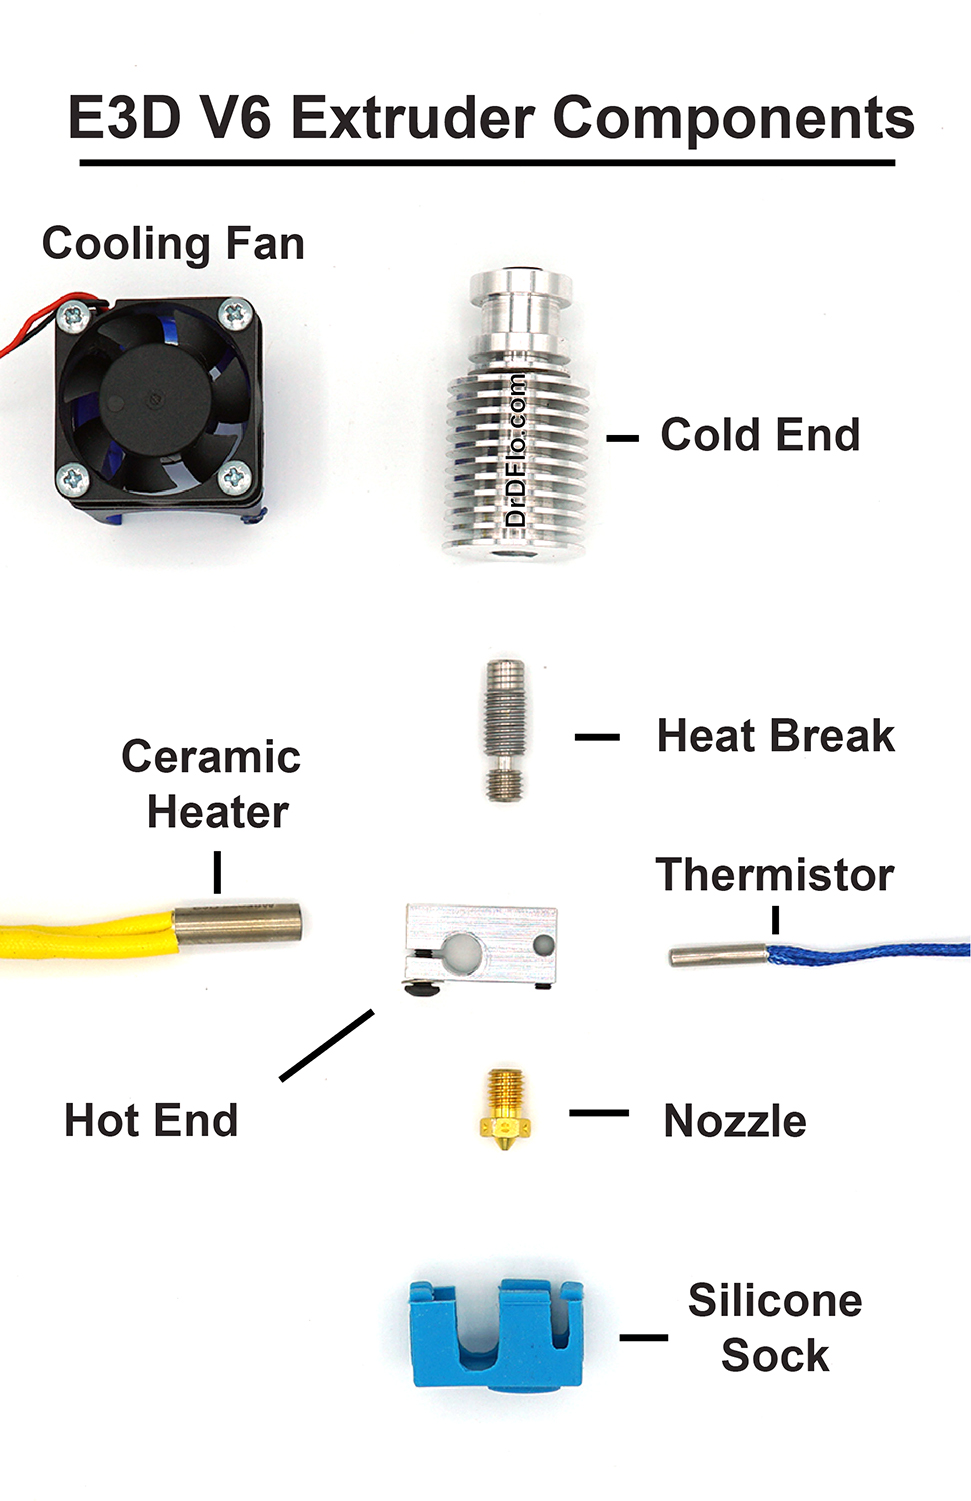 Exploded view of E3D V6 extruder. Disassembled and labeled components.